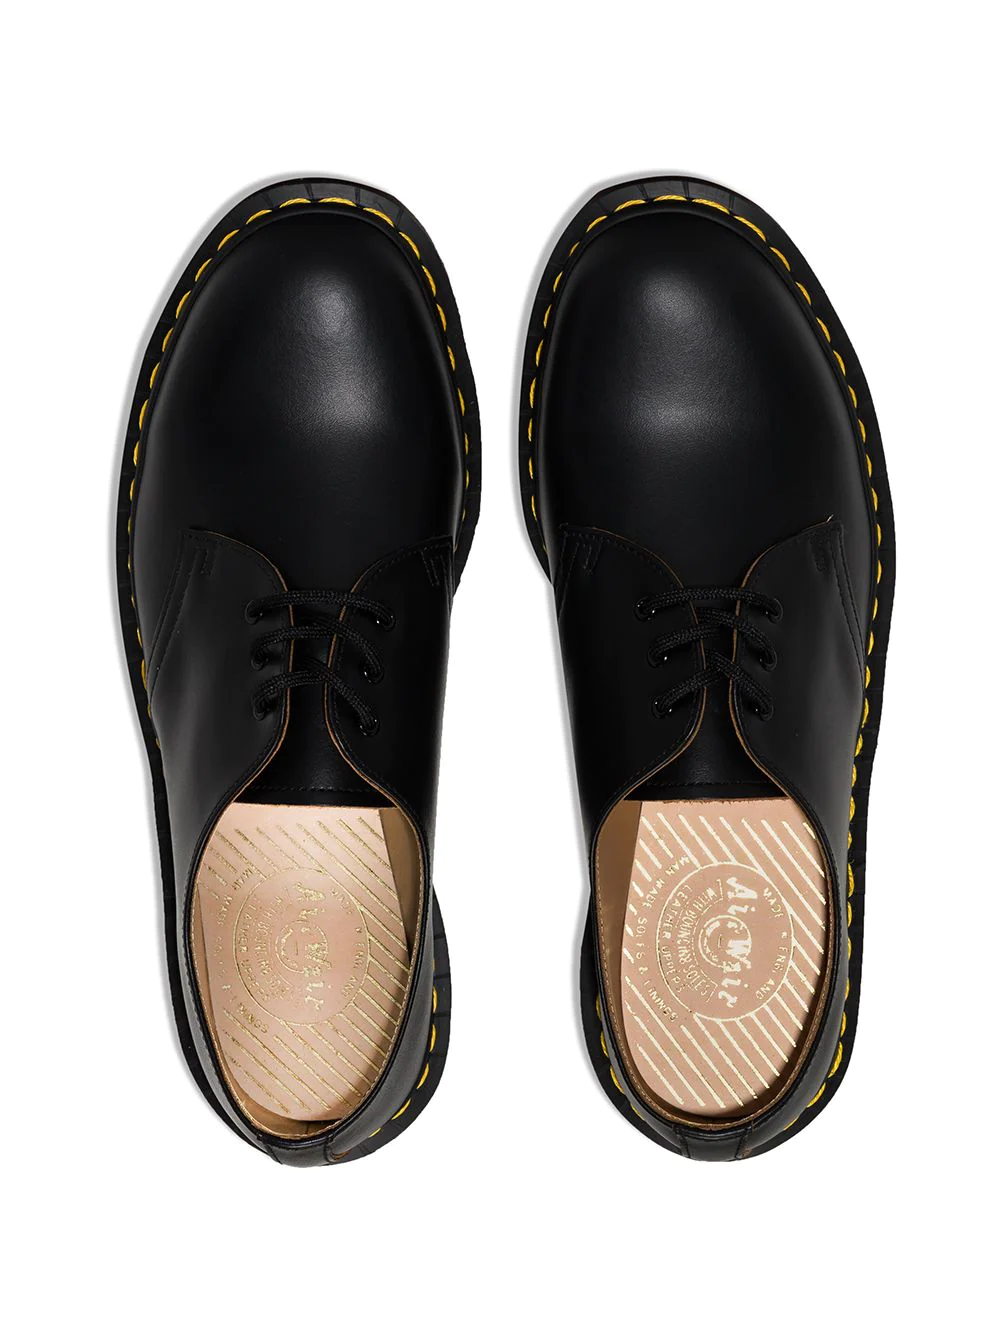 DR. MARTENS 1461 Made In England Oxford Shoes